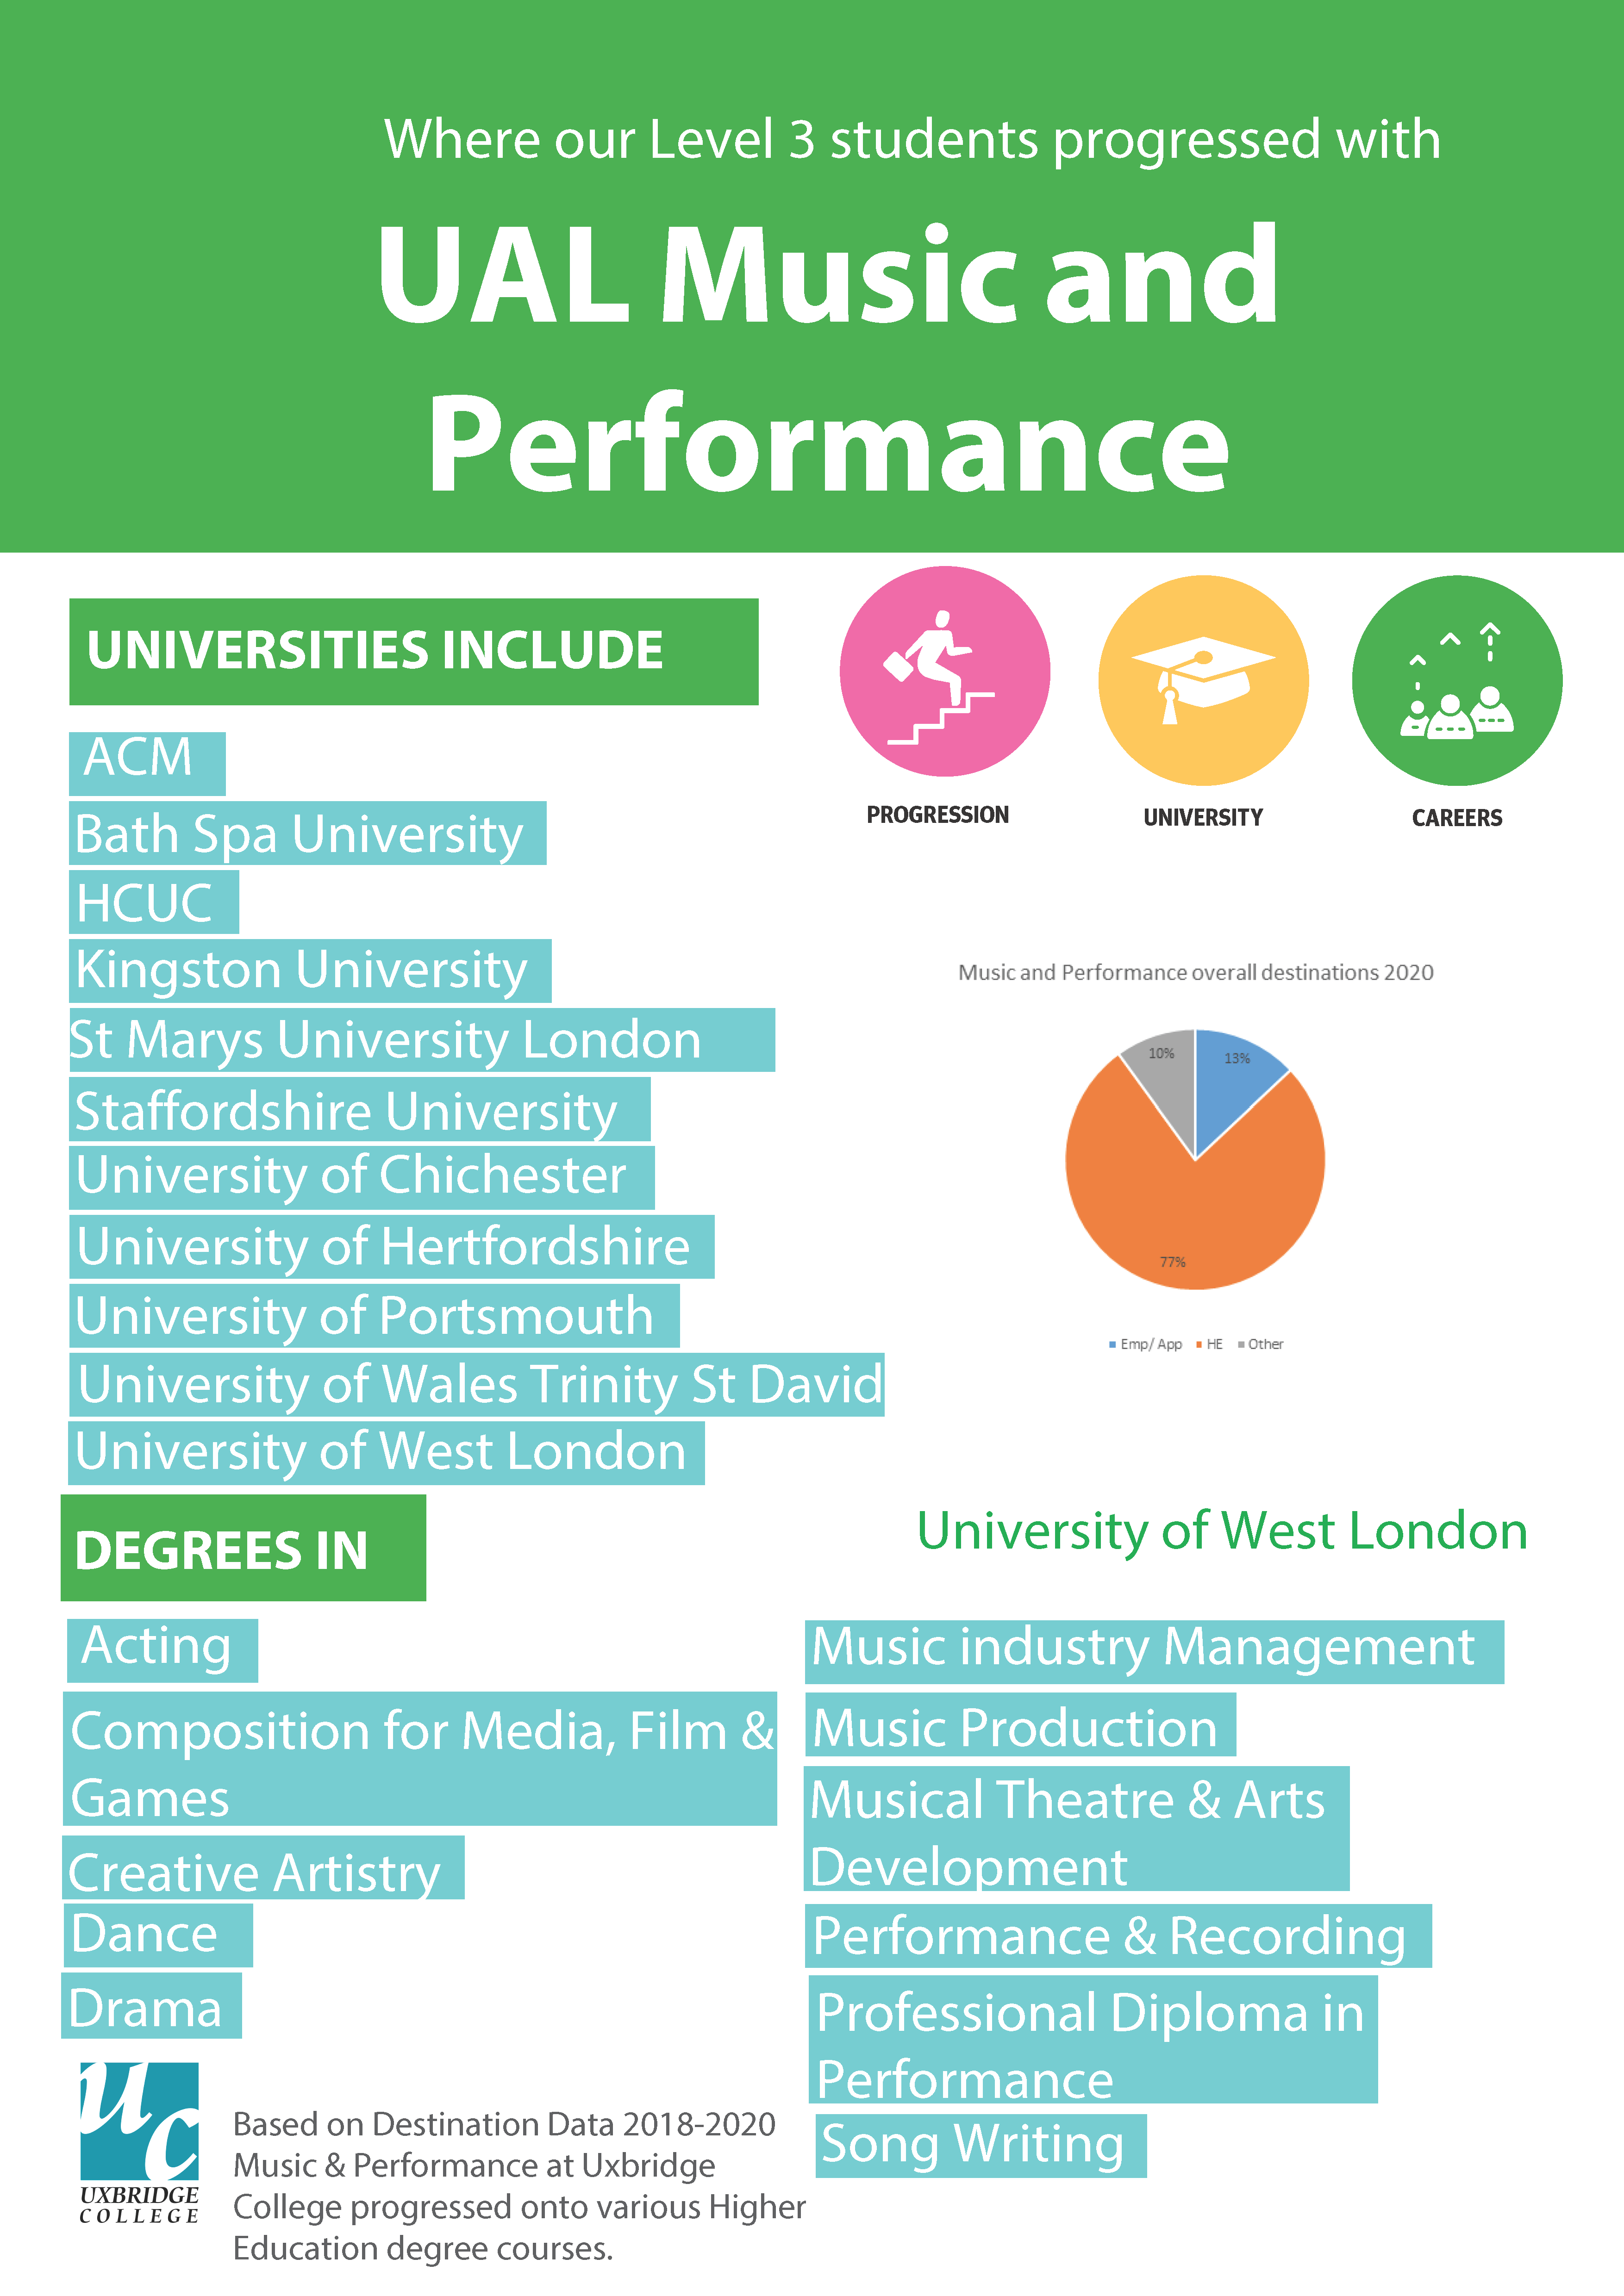 UAL Music and Performance